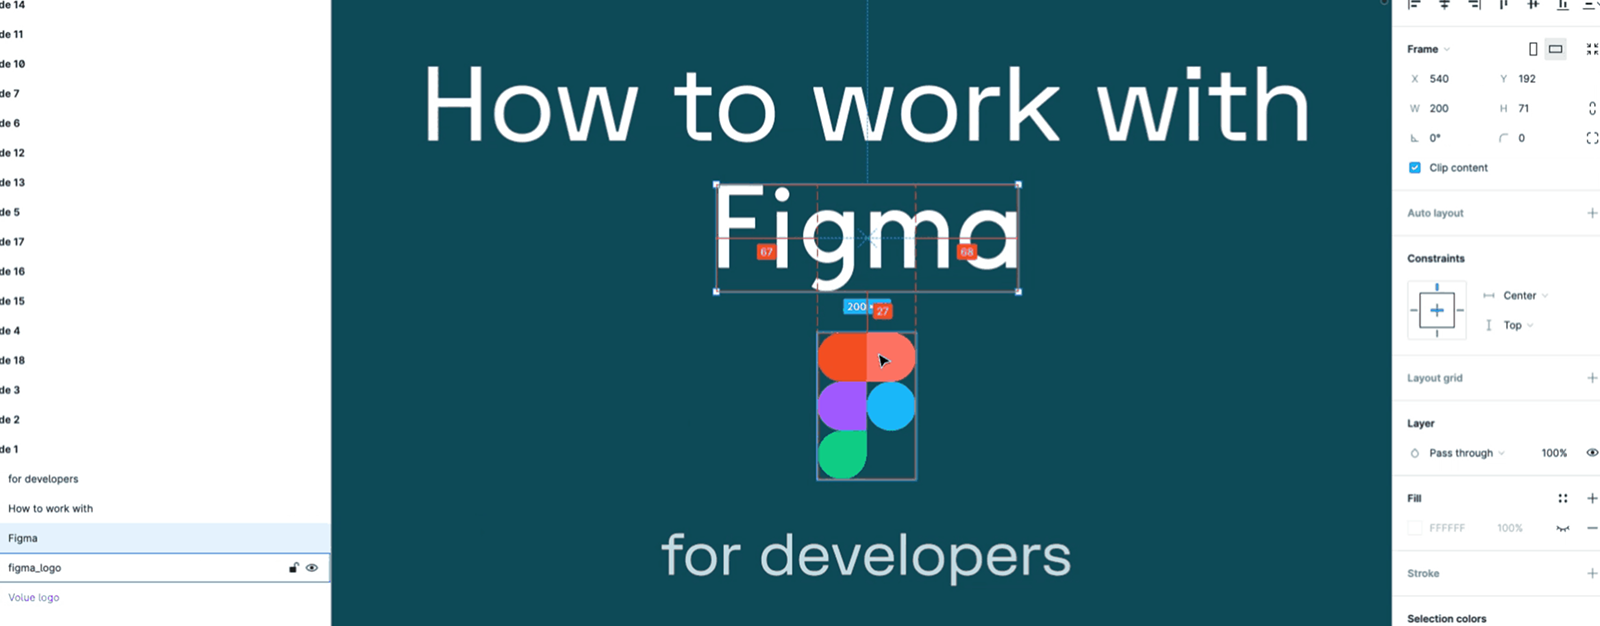 How to work with Figma cover